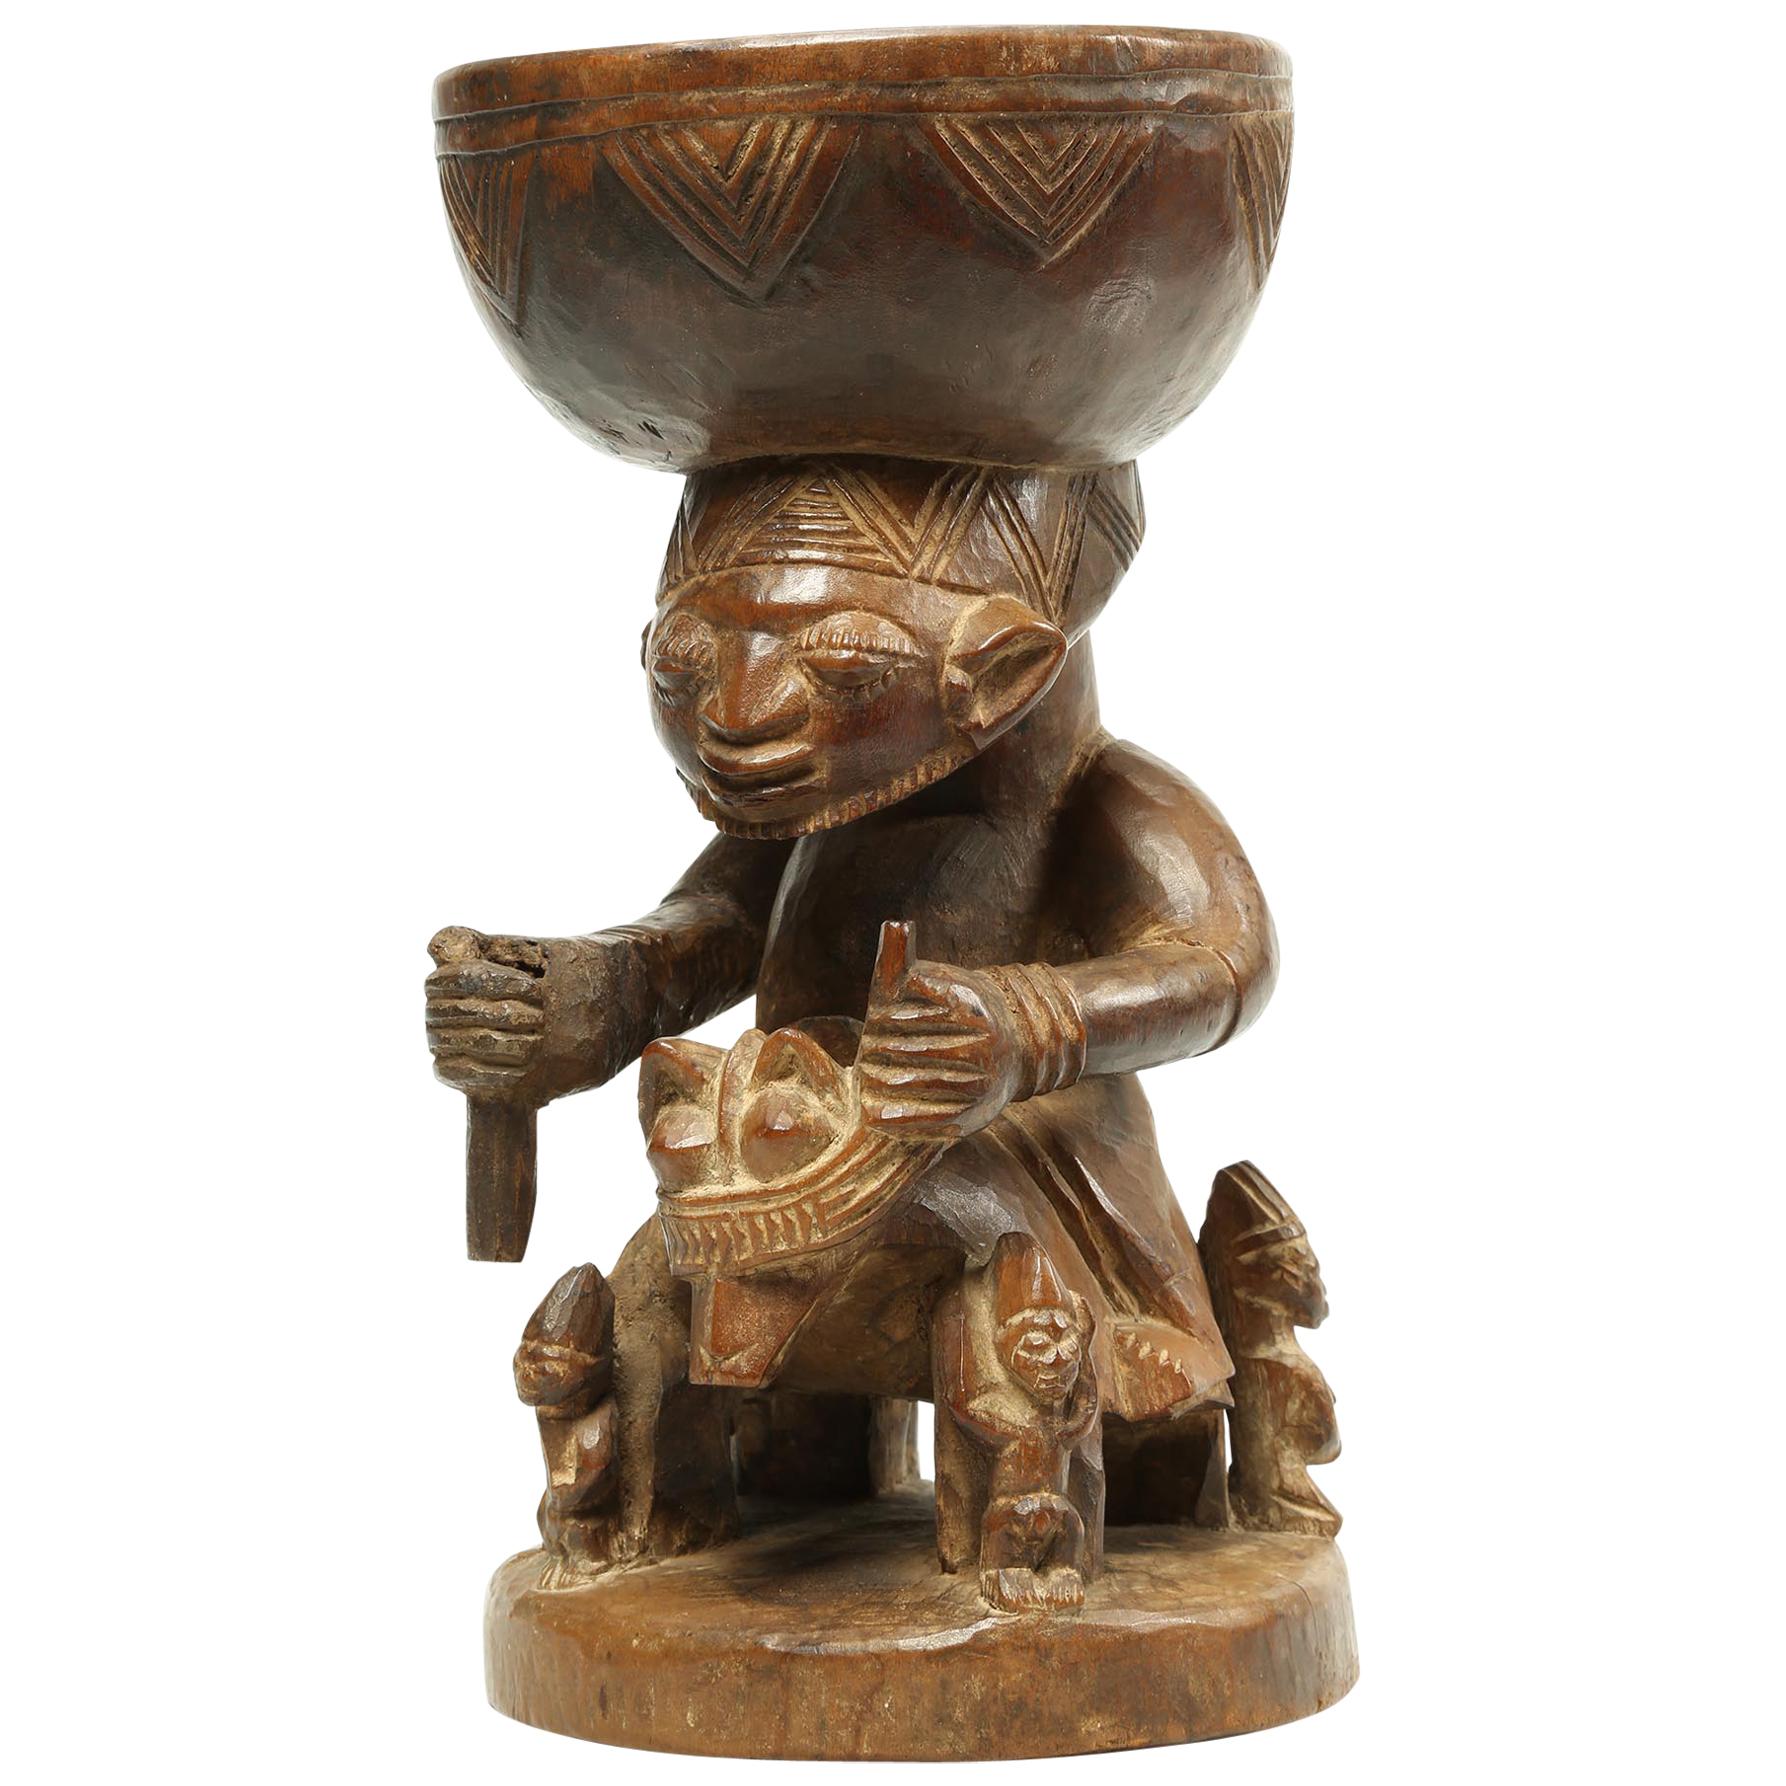 Yoruba Offering Bowl with Horse and Rider Early 20th Century Nigerian Tribal Art For Sale